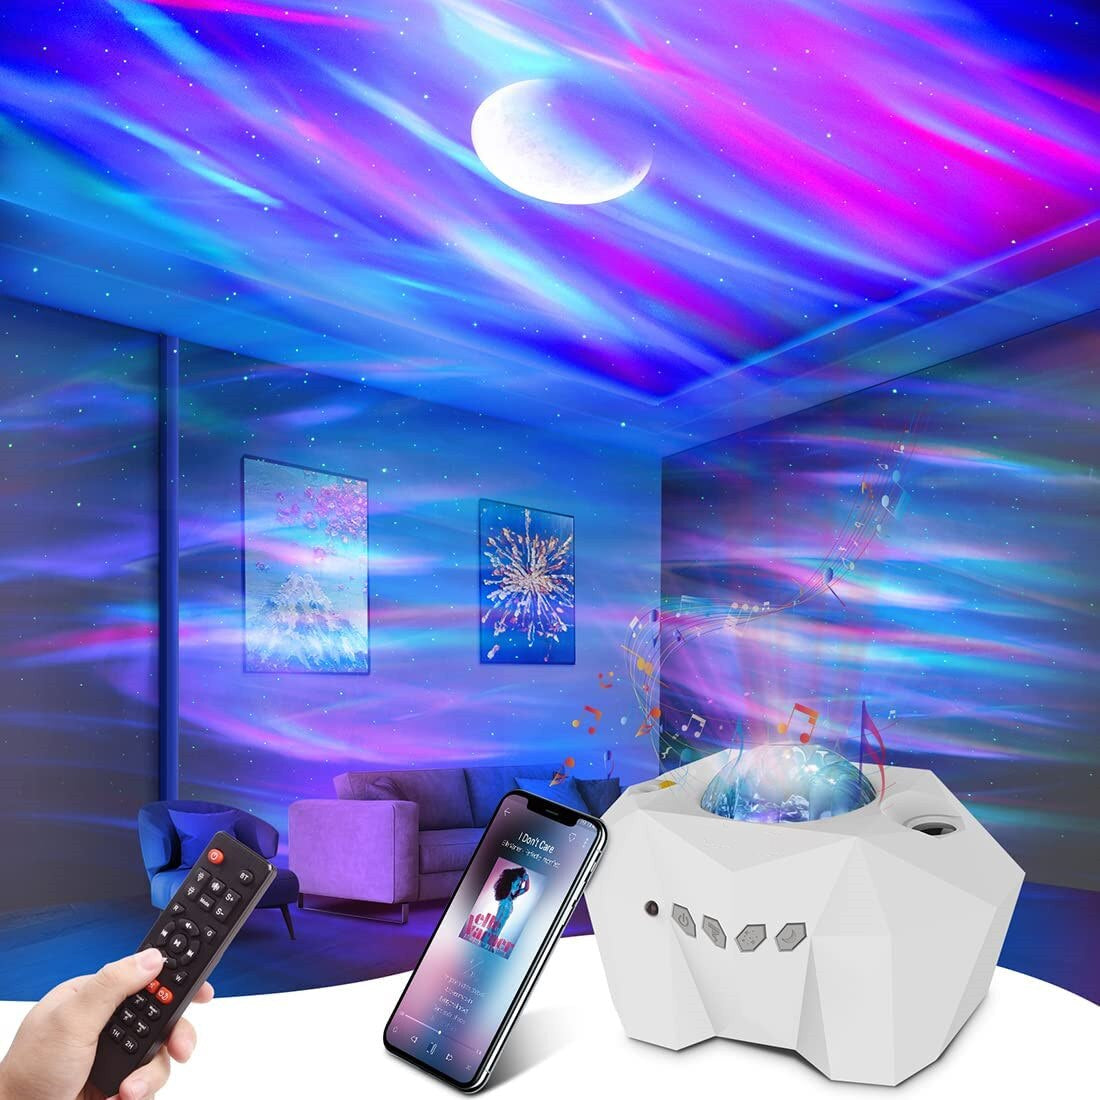 "Stellar Glow: LED Celestial Projector – Transform Your Space with Galaxy, Northern Lights, and Starry Sky Effects – Perfect Bedroom and Home Decoration Nightlight Luminaire Gift